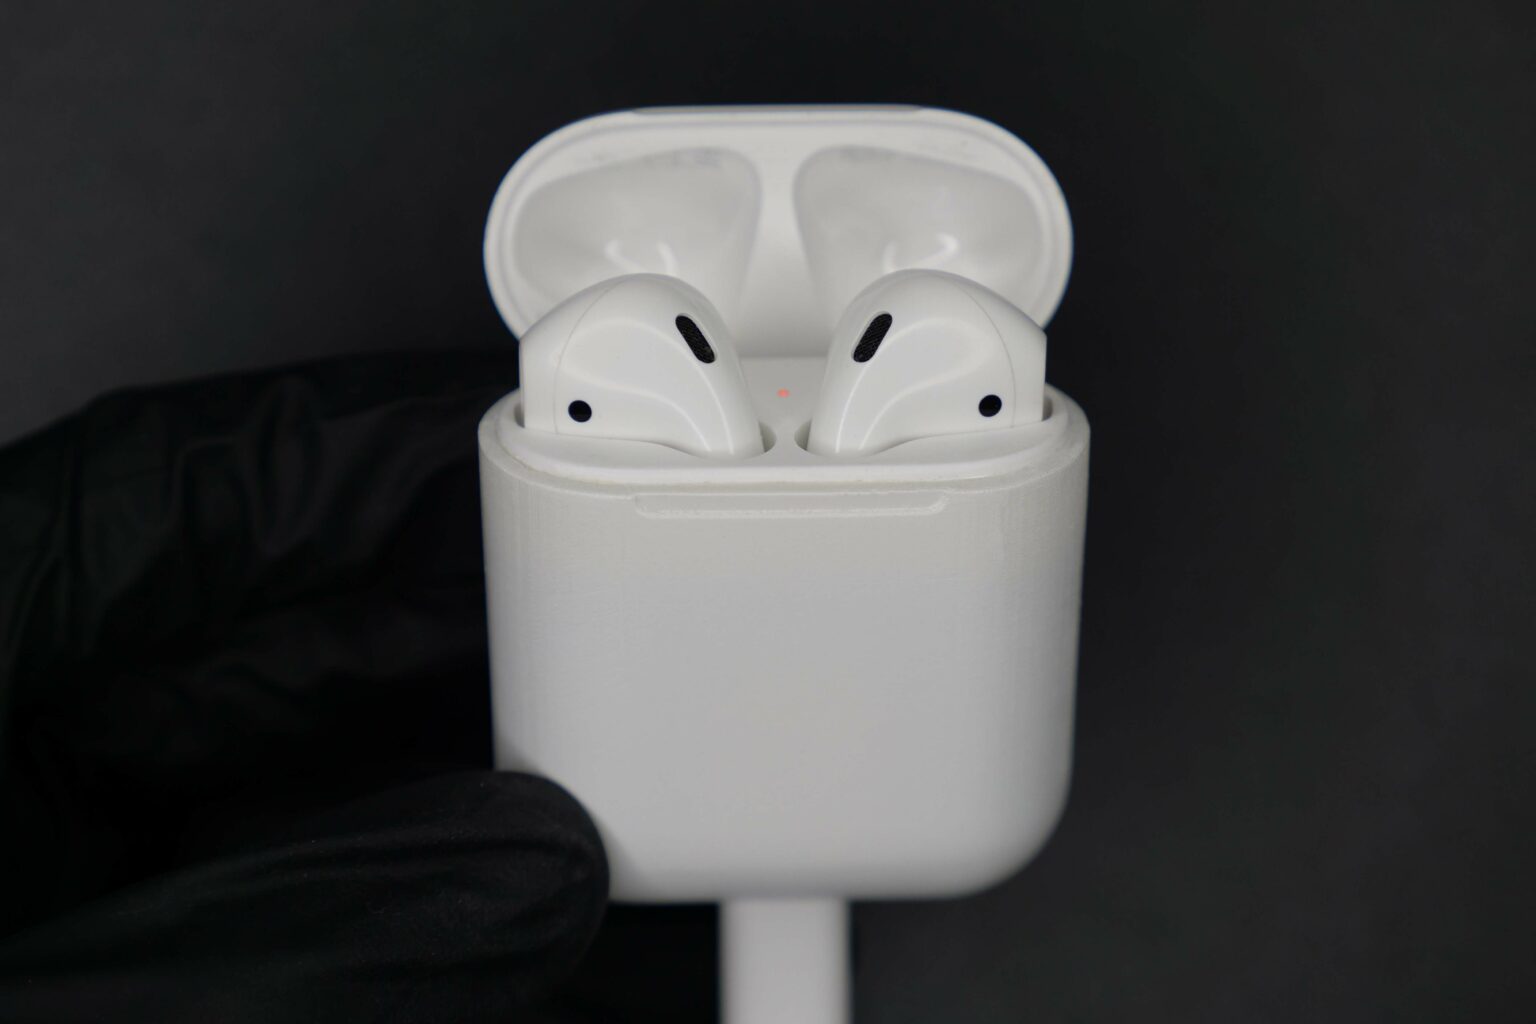 This AirPods charging case has a USB-C connection.